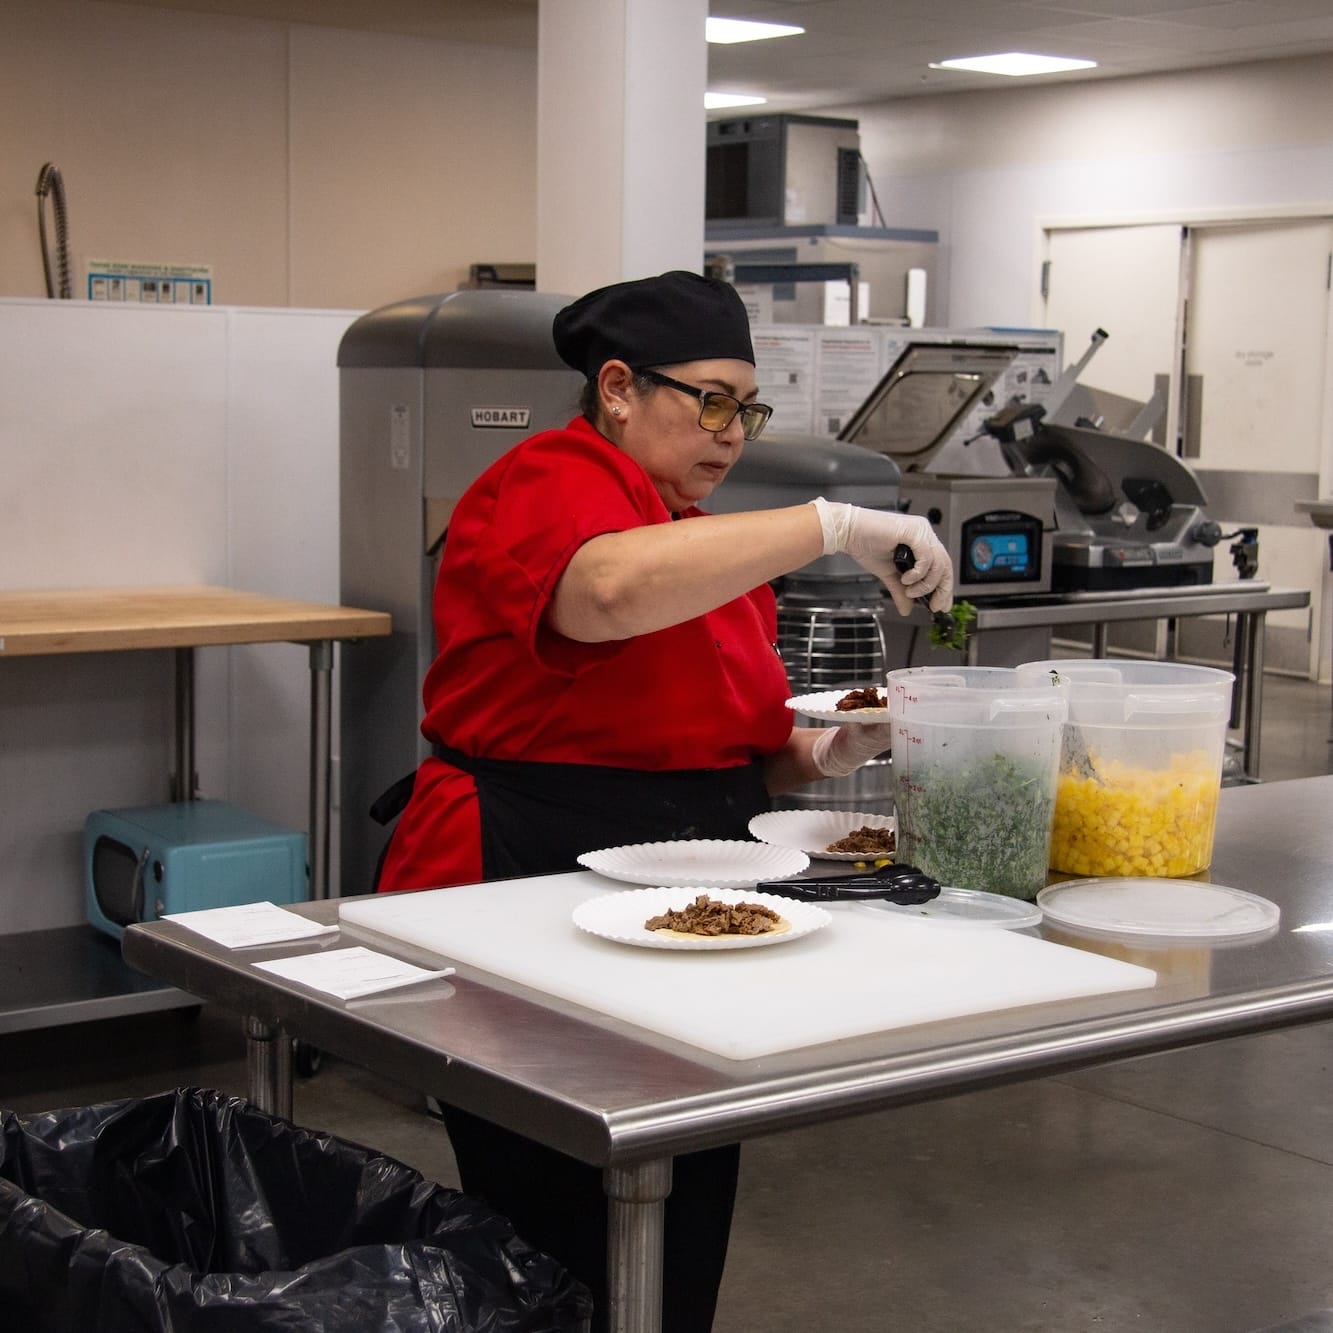 A Catapult kitchen incubator member plating catering food.